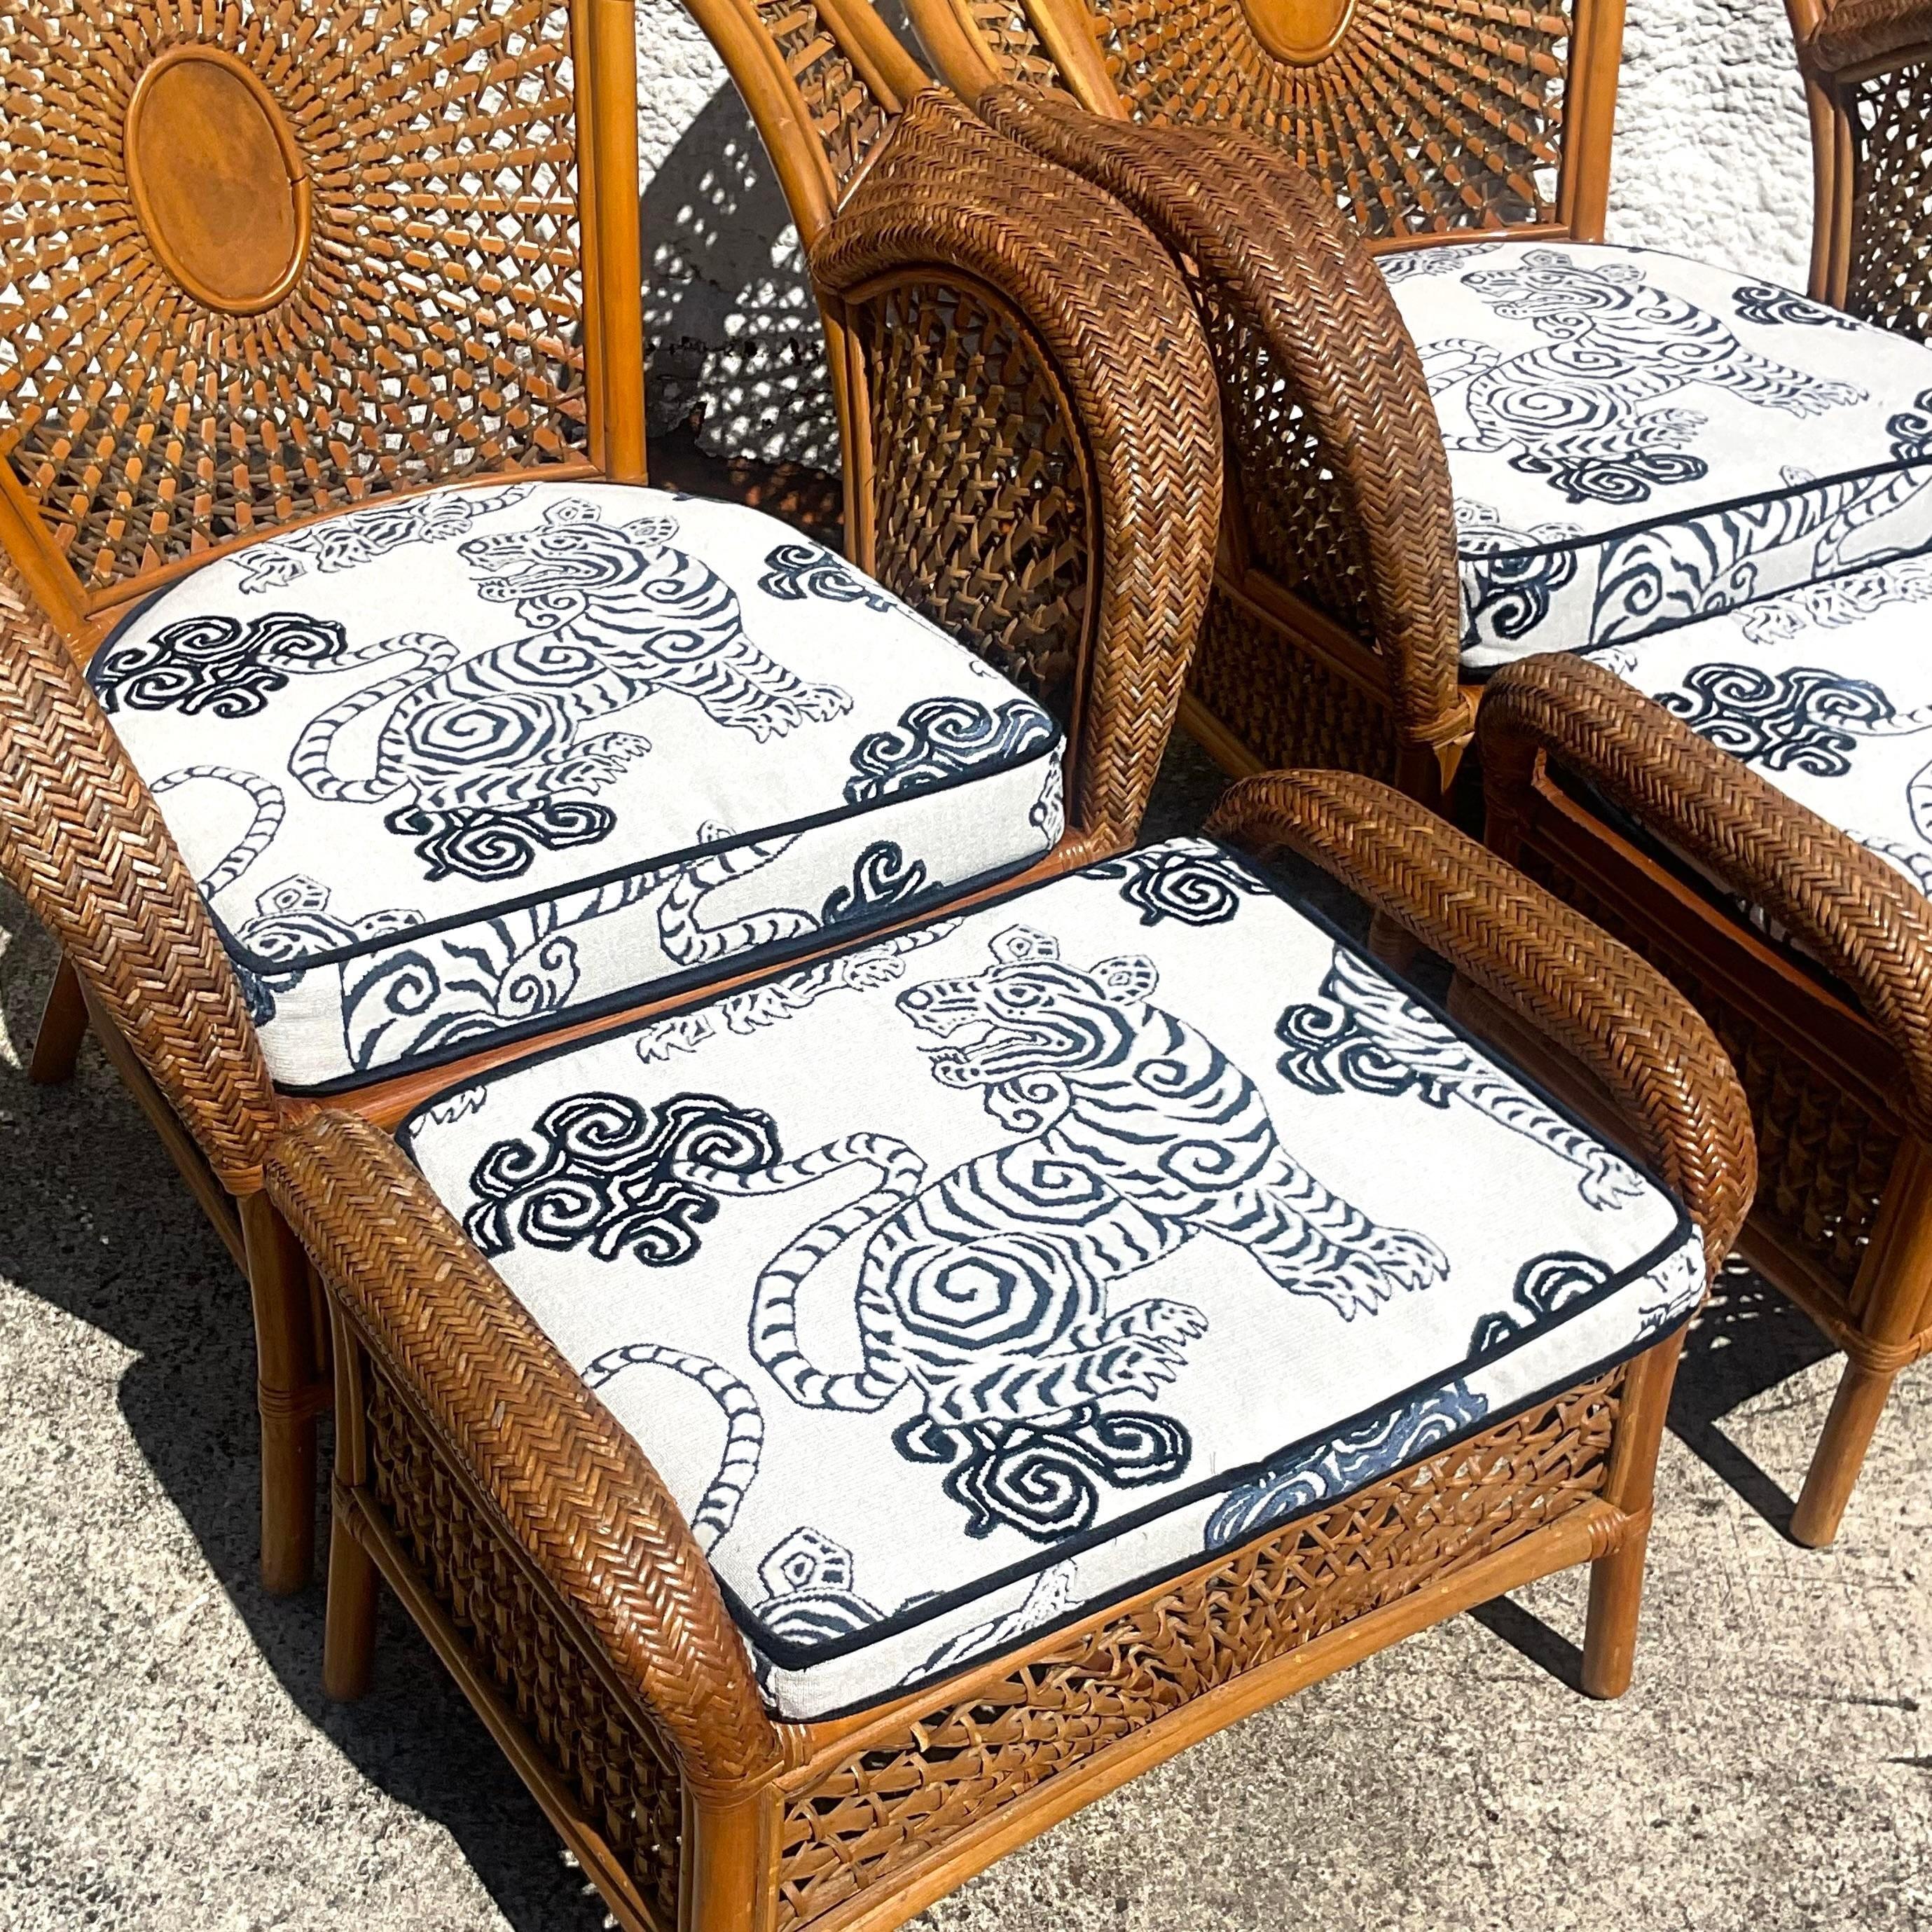 A fabulous pair of vintage Coastal lounge chair and ottoman set. The coveted shape with gorgeous De Leo “Akbar Tuxedo Black Tiger” upholstered cushions. Acquired from a Palm Beach estate.

Ottoman 28x17.5x19